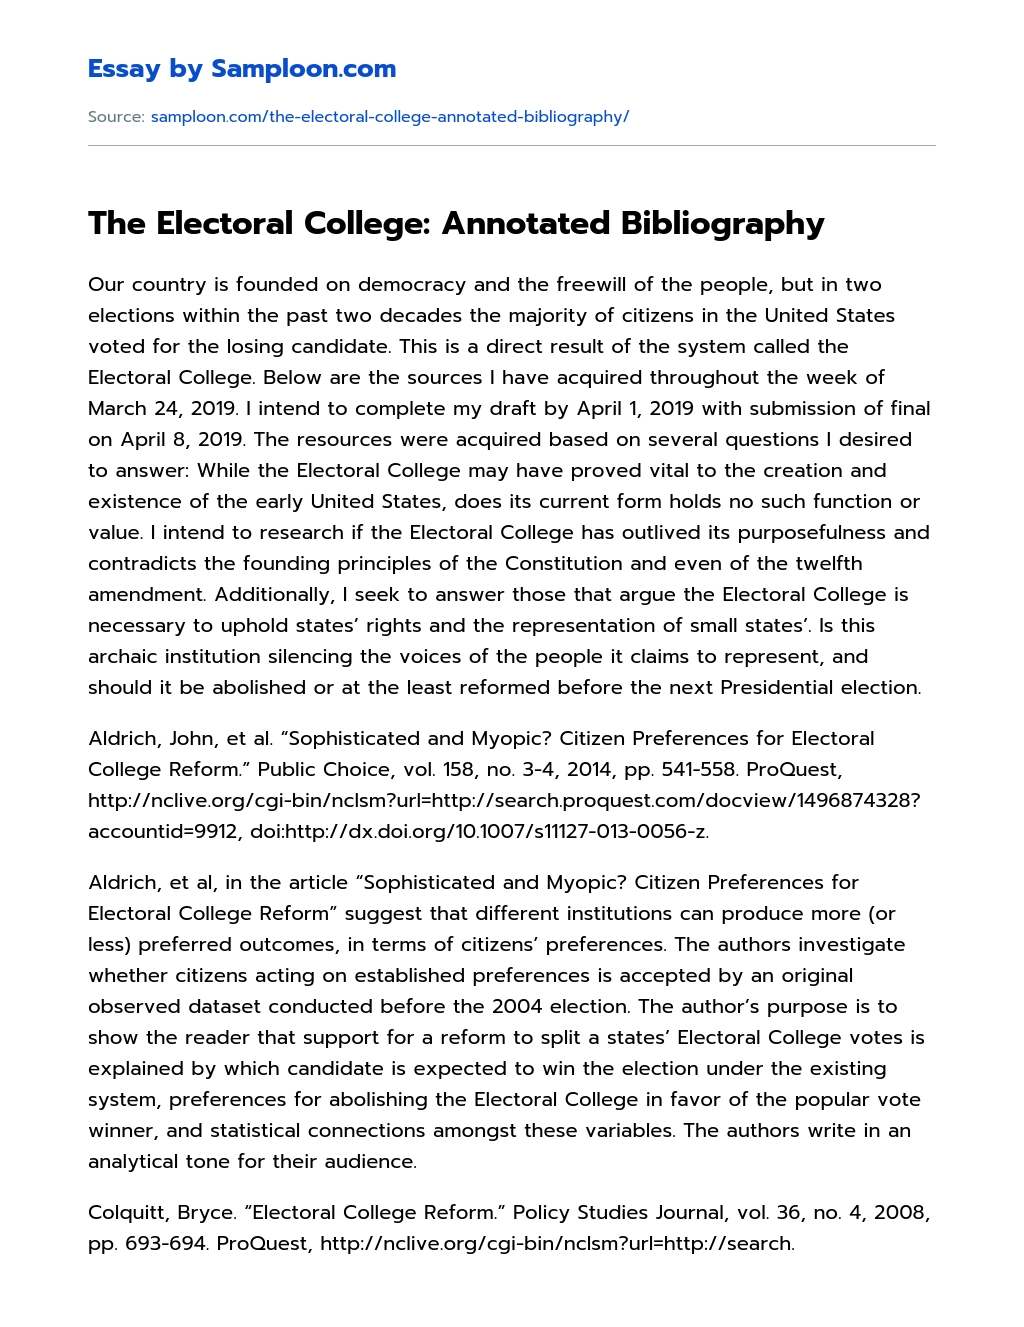 The Electoral College Annotated Bibliography essay